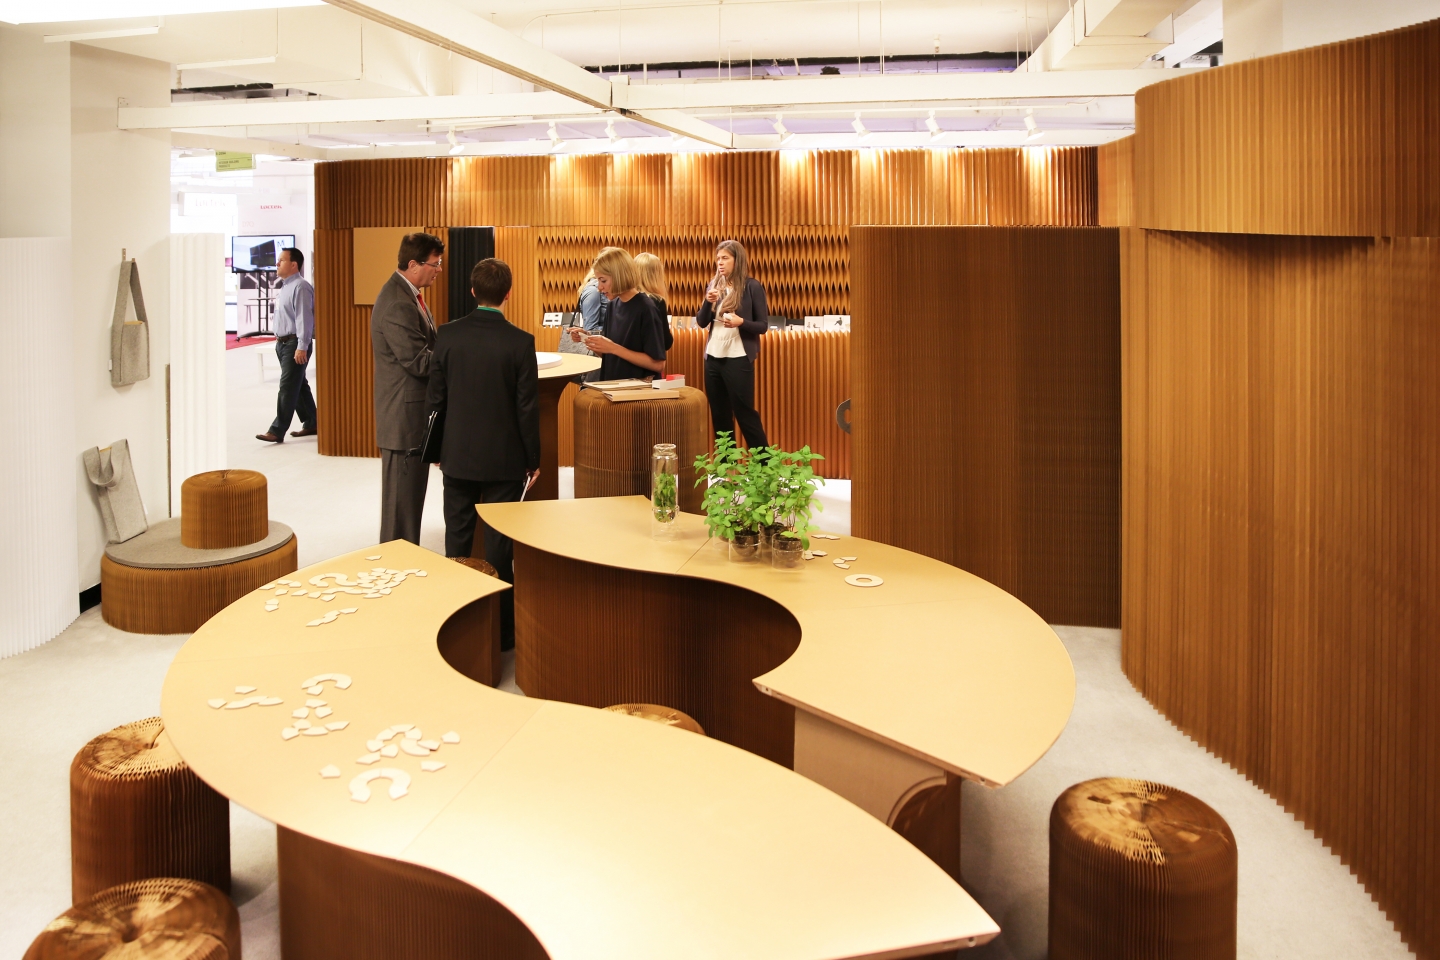 honeycomb paper furniture by molo - molo's installation at NeoCon featured a range of products from cantilever table to softwall + softblock and float